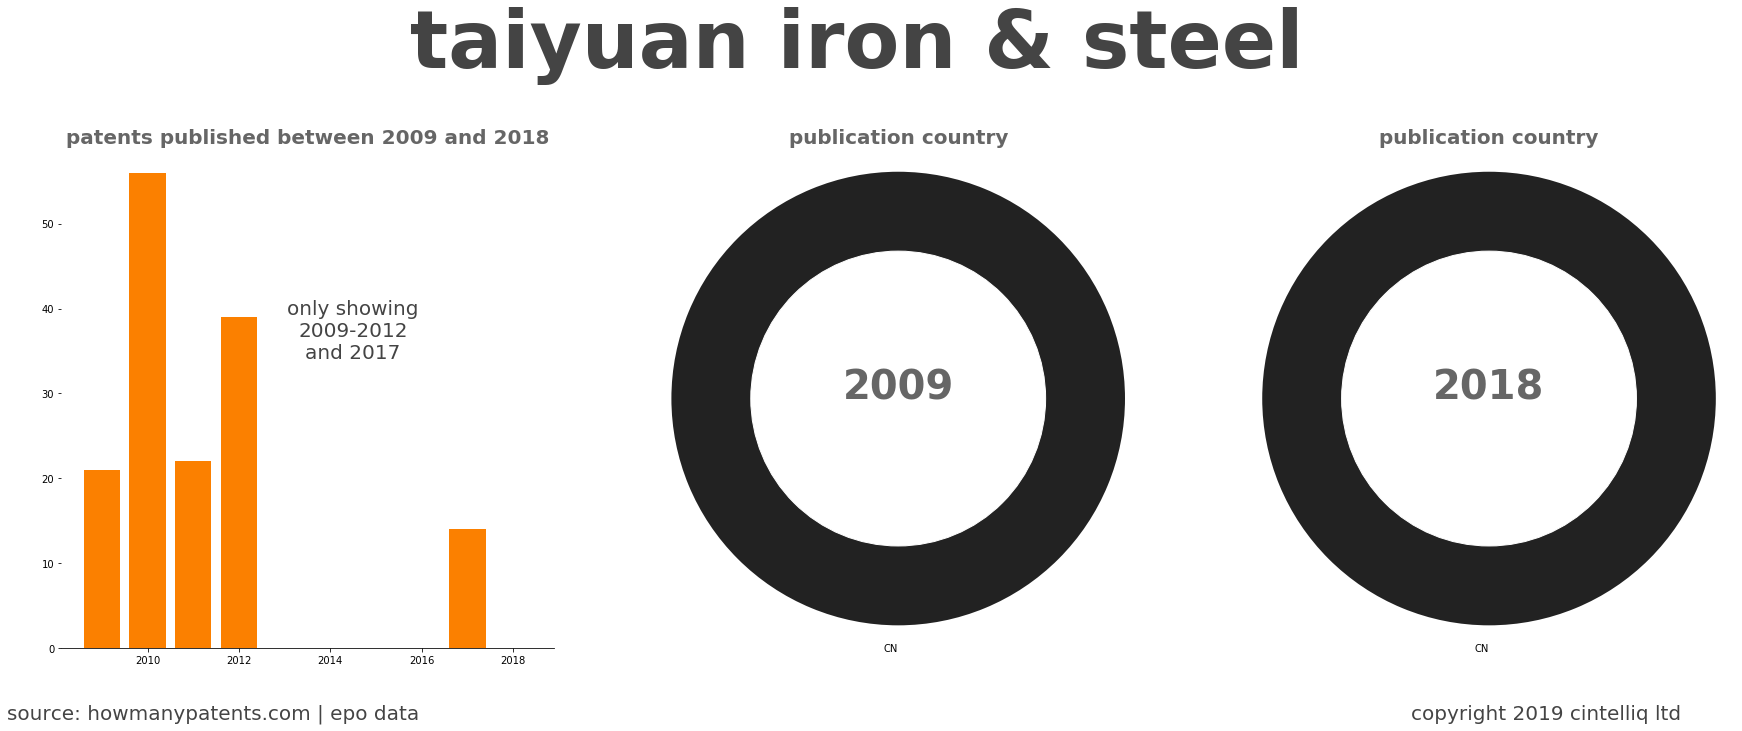 summary of patents for Taiyuan Iron & Steel 